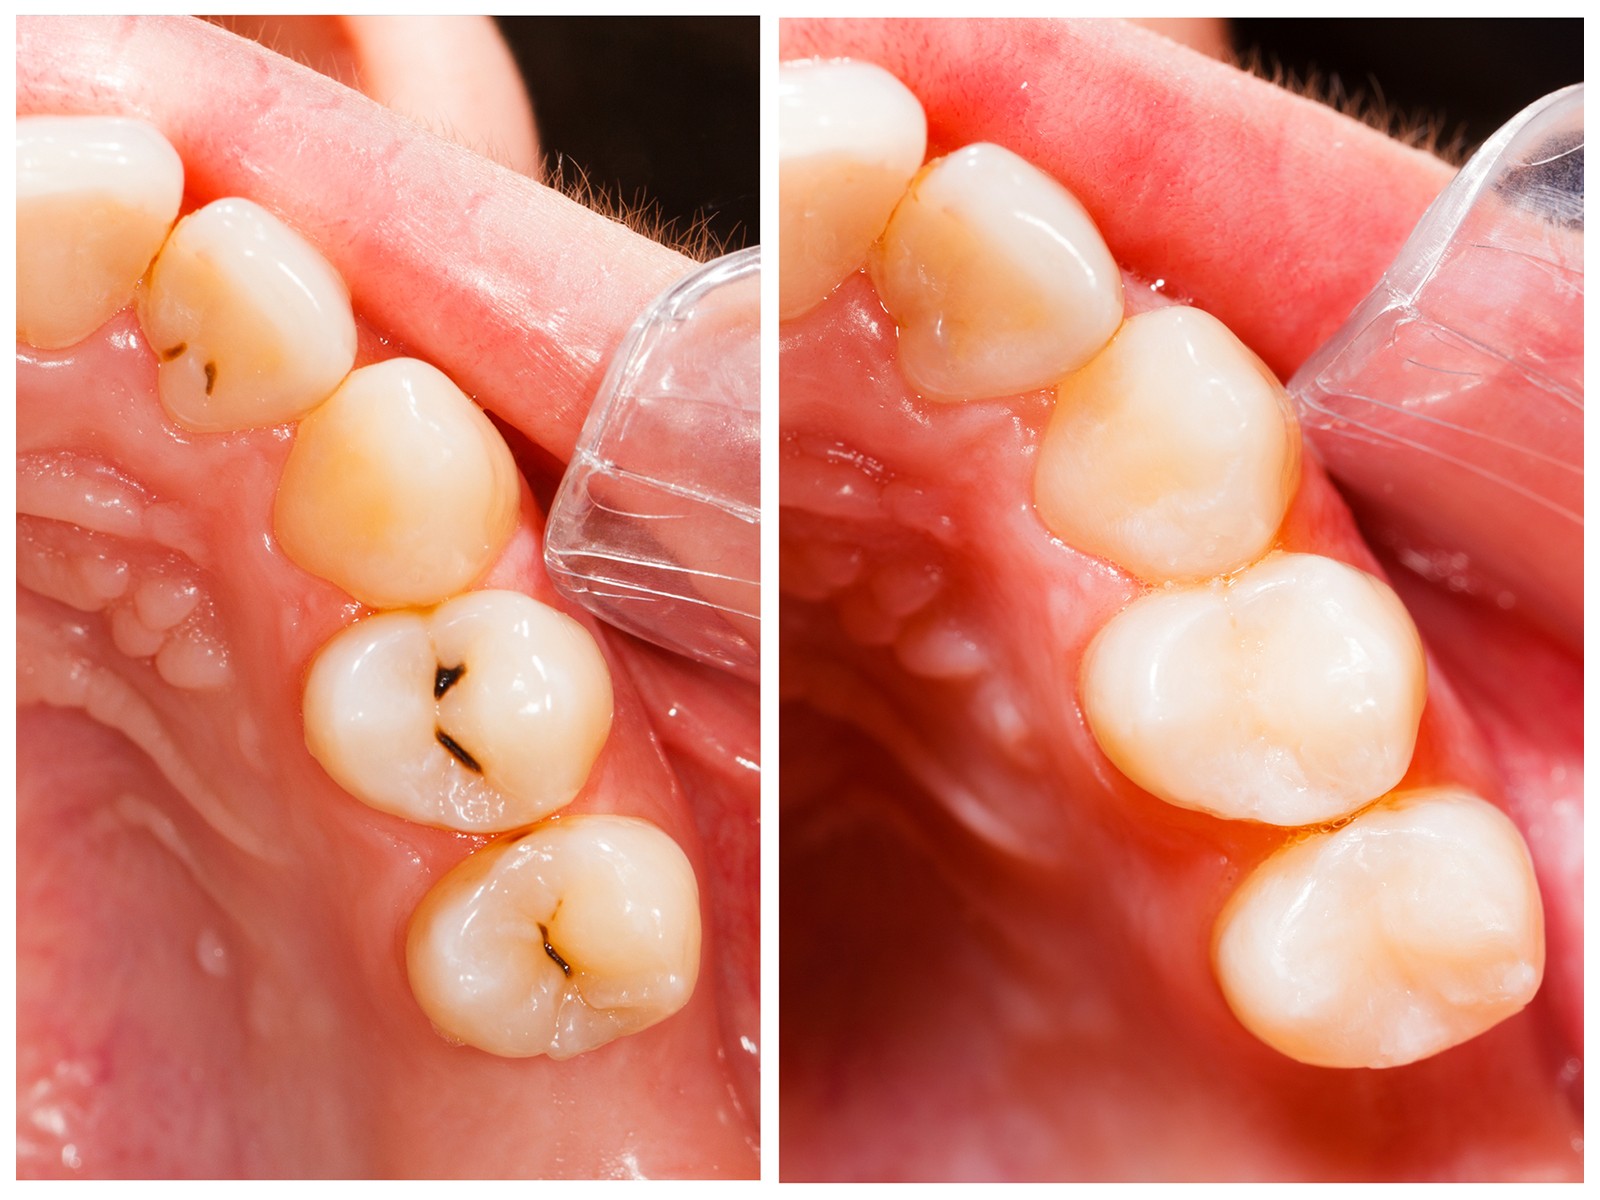 Benefits of Composite Resin Fillings